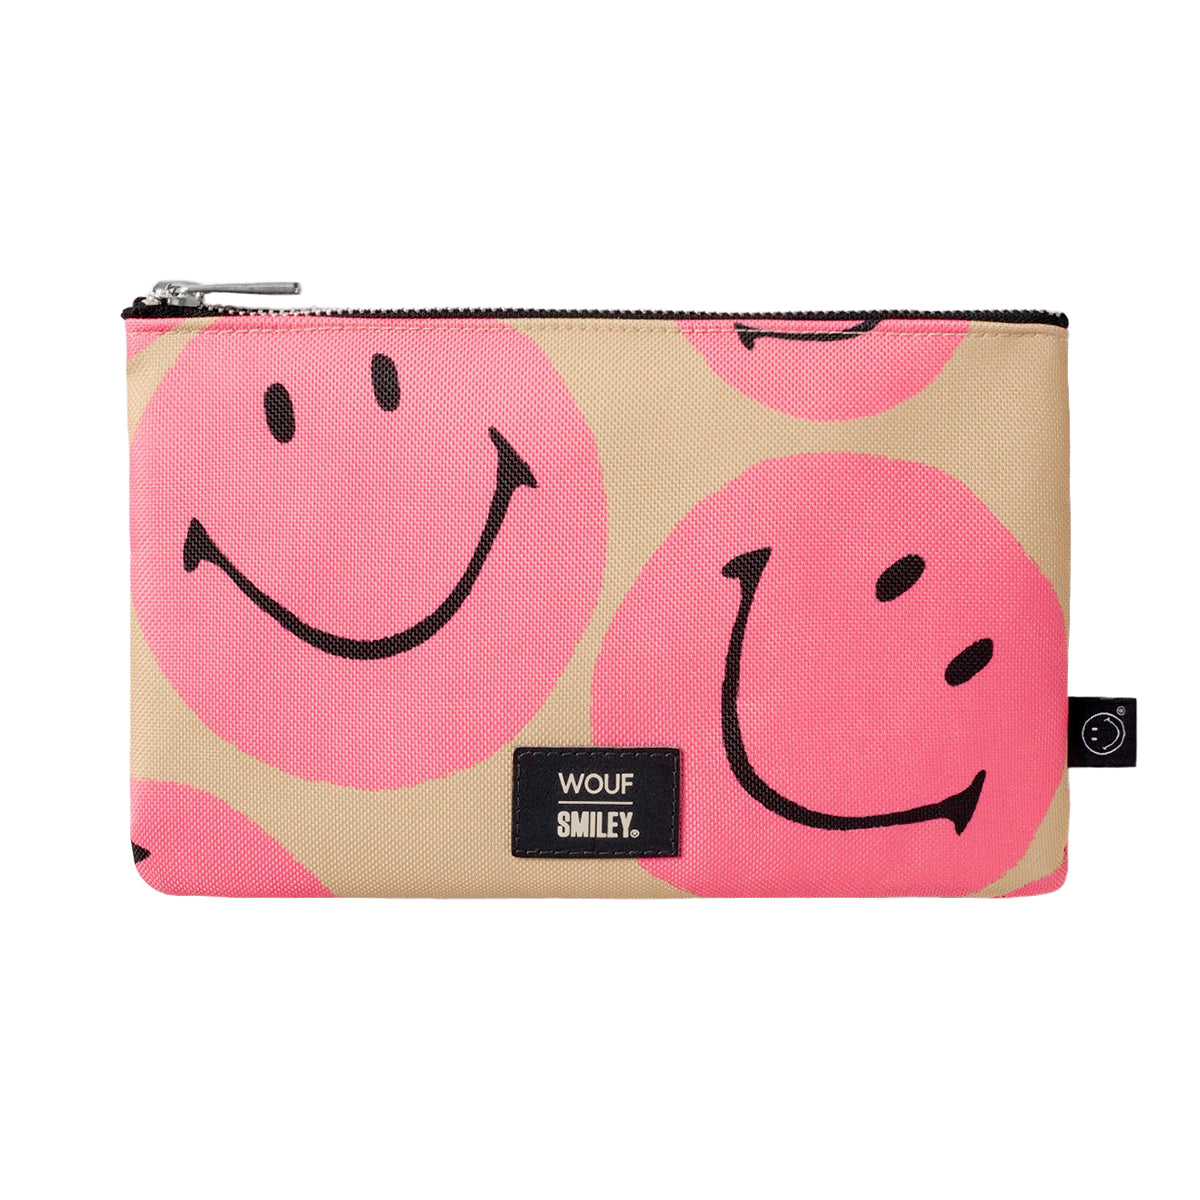 wouf-wouf-smiley-small-pouch-1